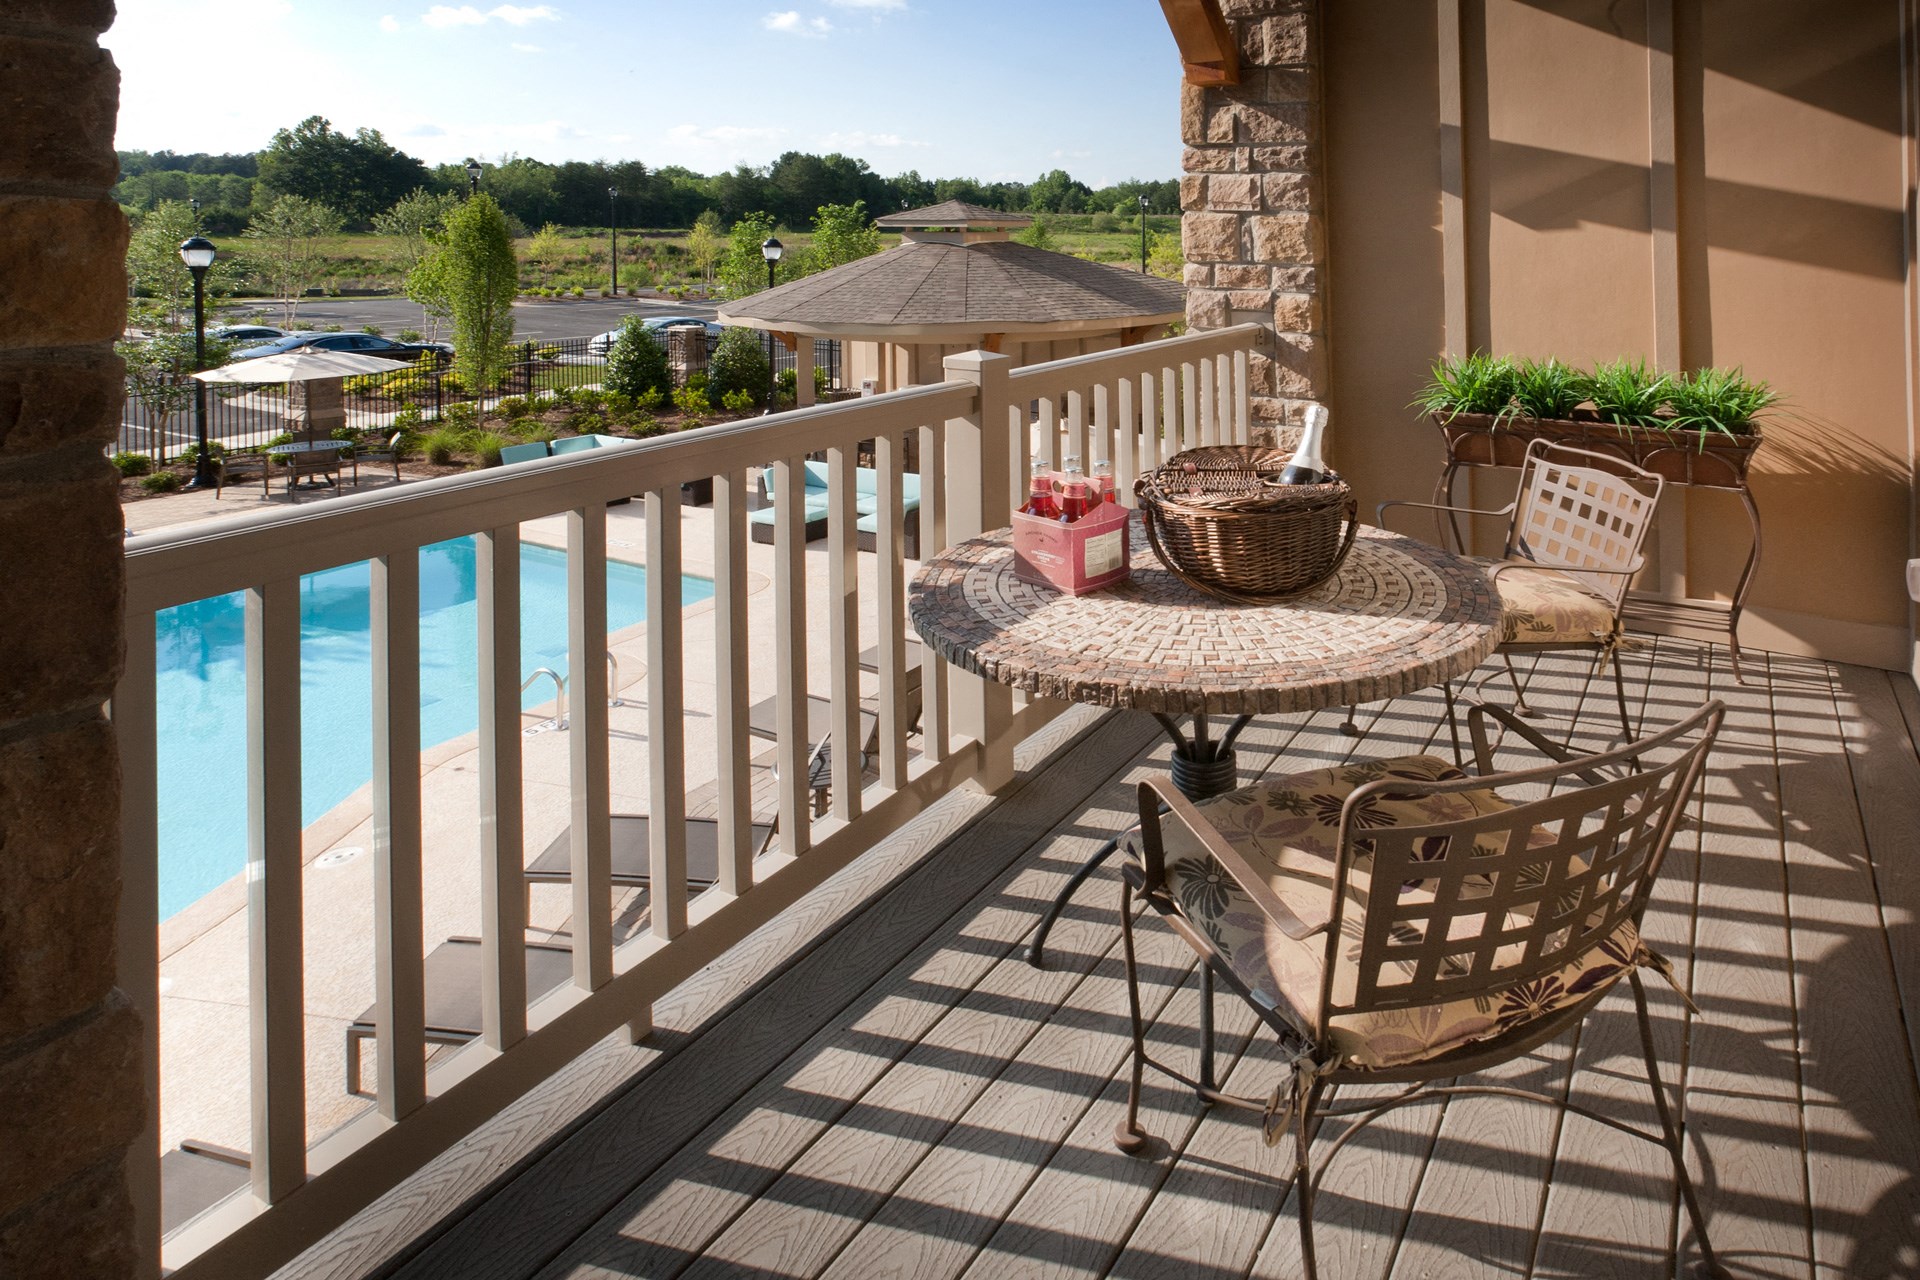 Balcony space with a table, two chairs, and a view of the pool area.